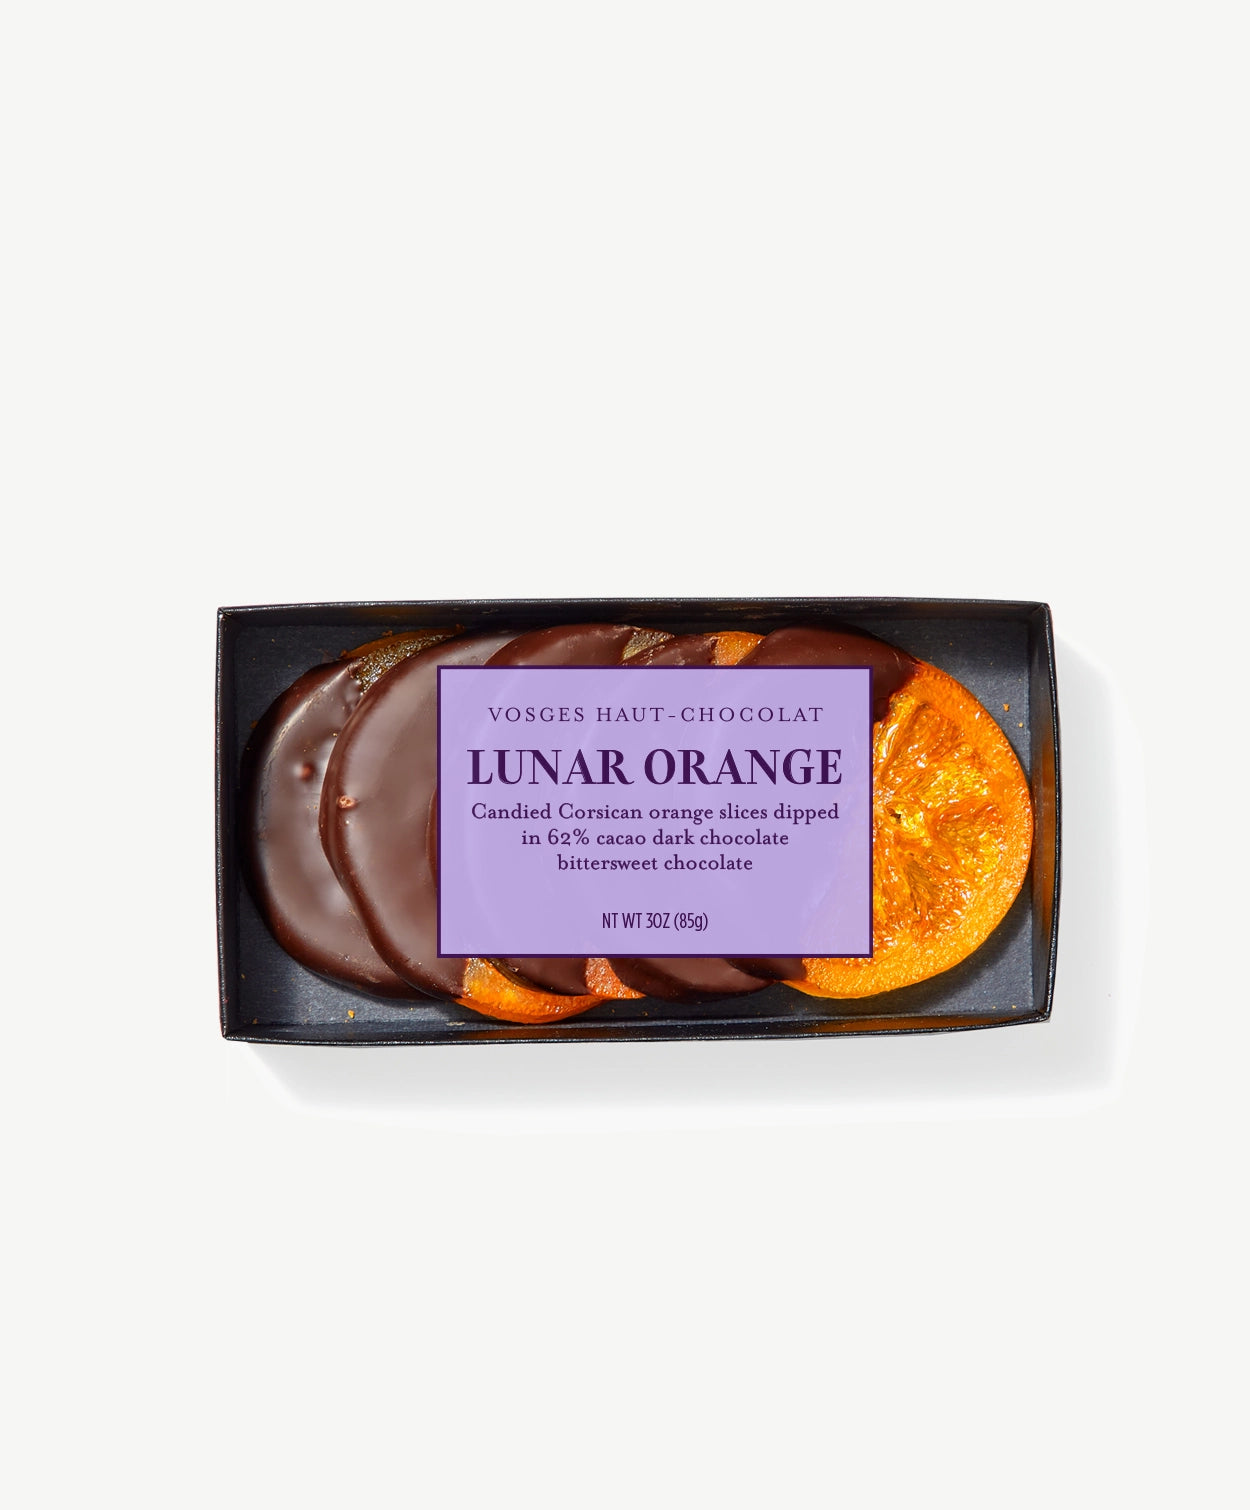 Several crystalized candied orange slices dipped in Vosges chocolate in a clear package bearing a light purple label on a grey background.